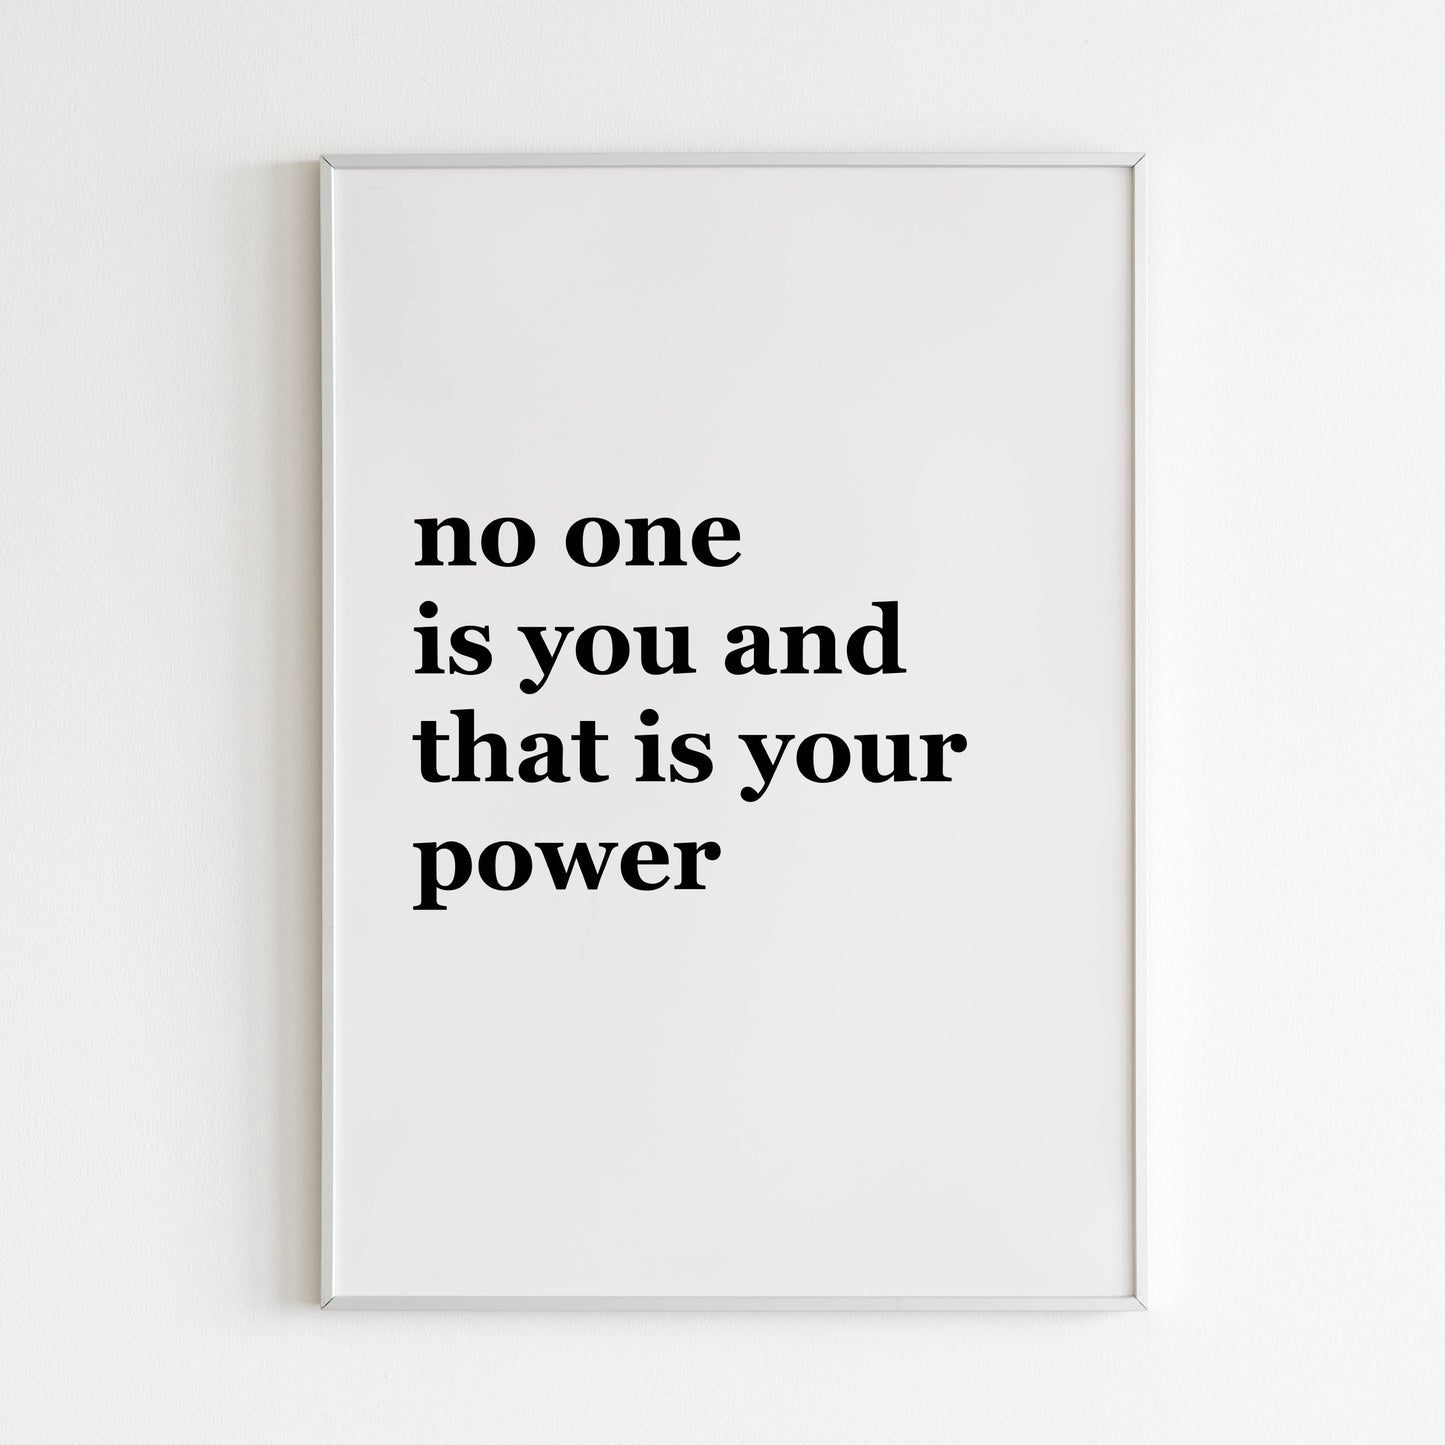 Downloadable "No One Is You" wall art for embracing your individuality.